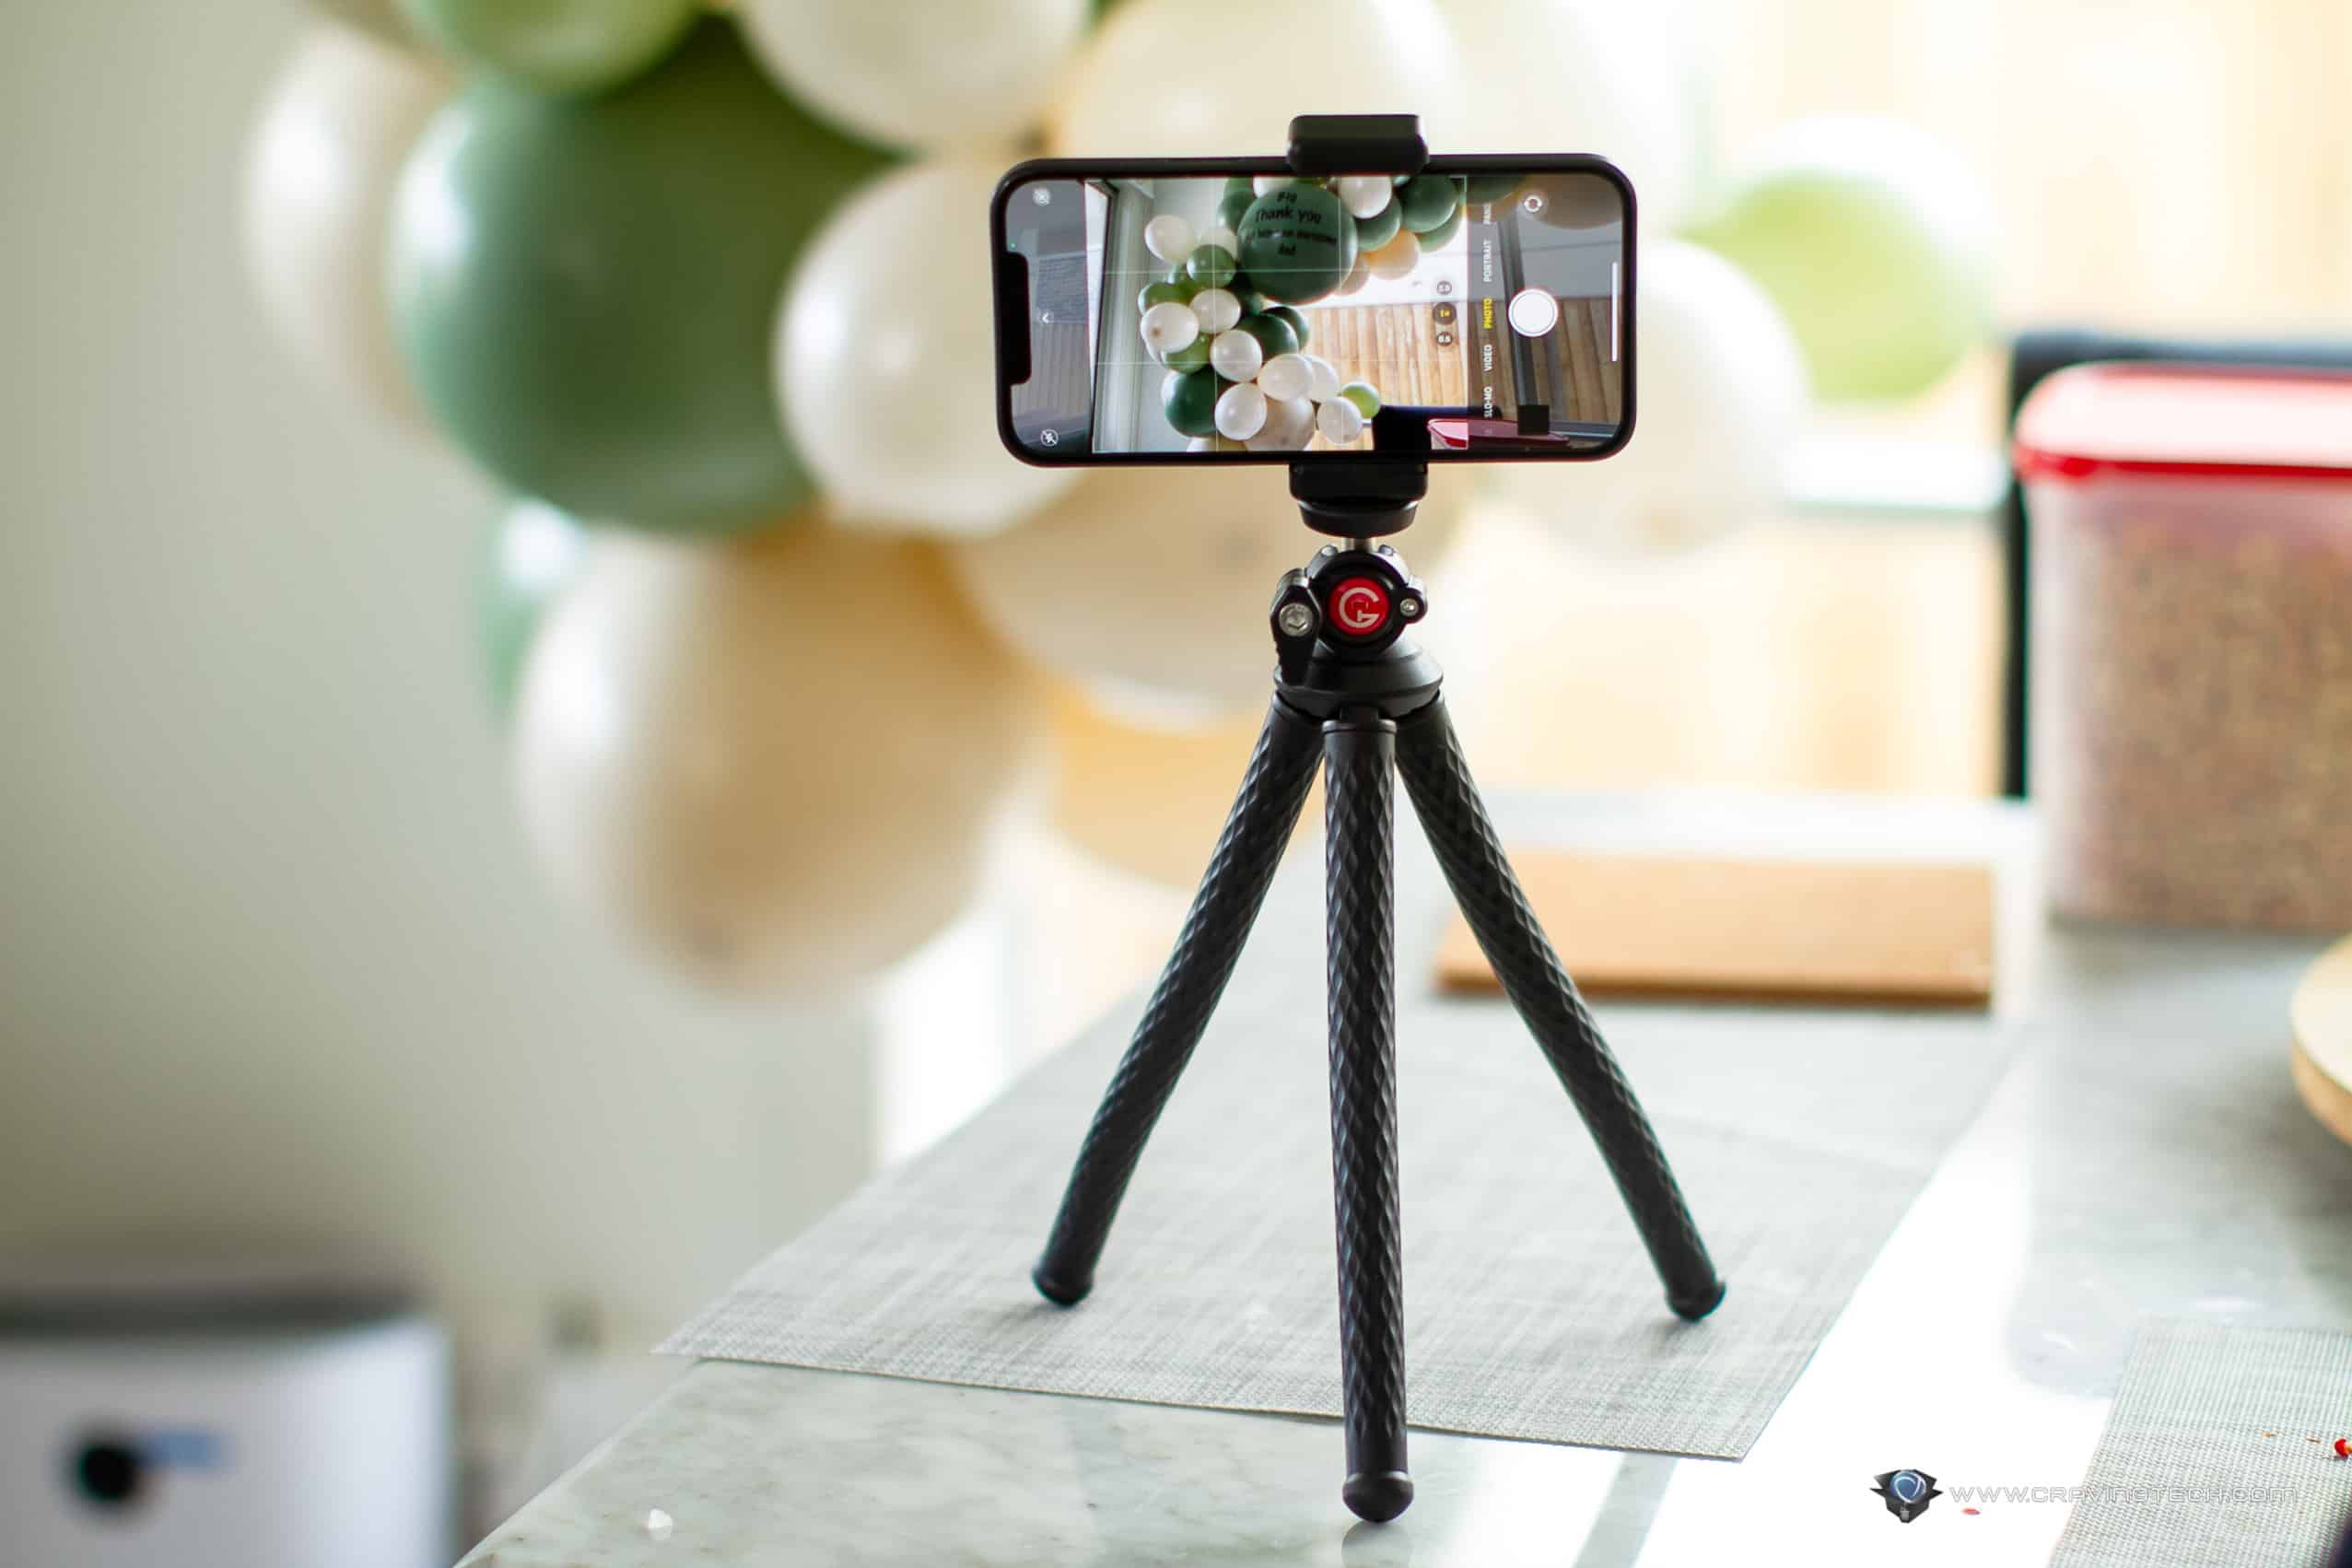 Flexible Tripod with 7 Aluminum Cores&Universal Clip Portable Small Tripod Stand for Cameras GooFoto Phone Tripod Cell Phone Tripod for iPhone/Samsung/Android 